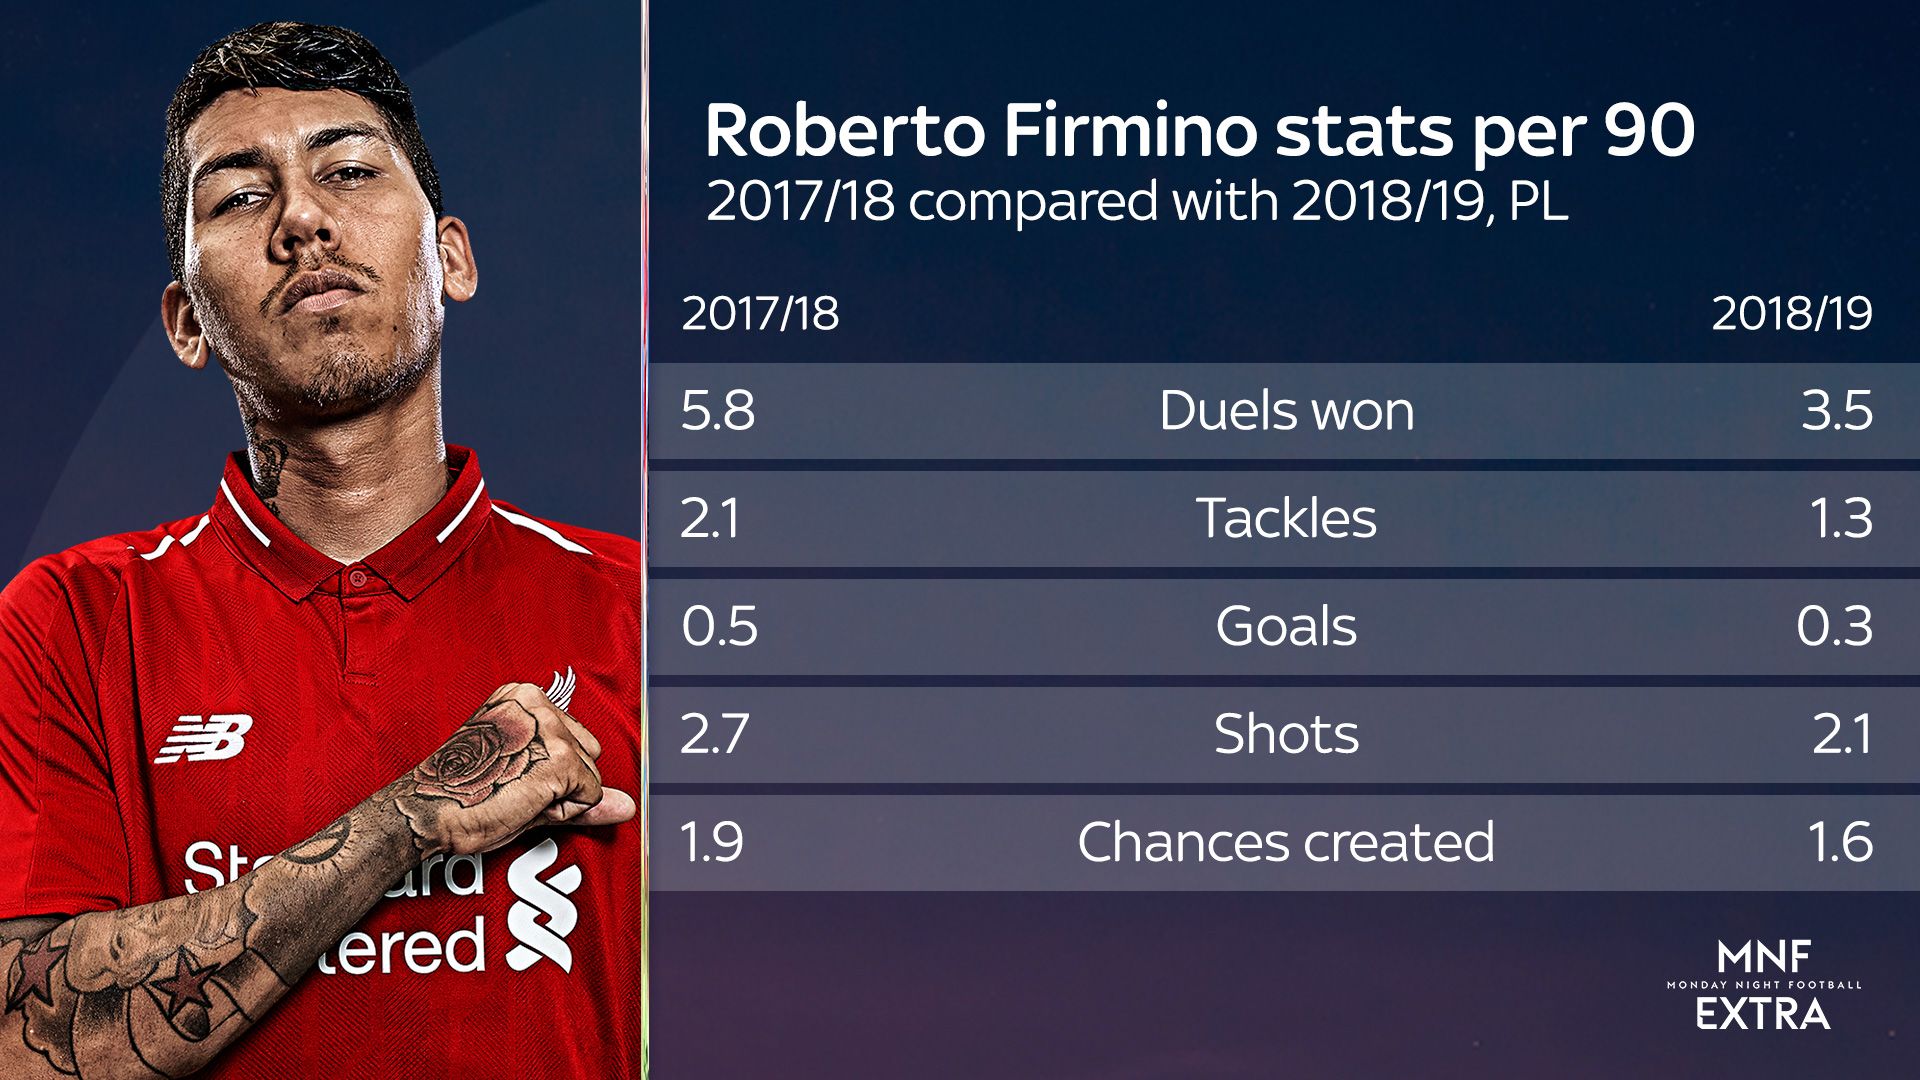 Roberto Firmino has been booked more times (7) for 'excessive celebration'  since 2012/13 than any other player in Europe's top 5 leagues. :  r/LiverpoolFC